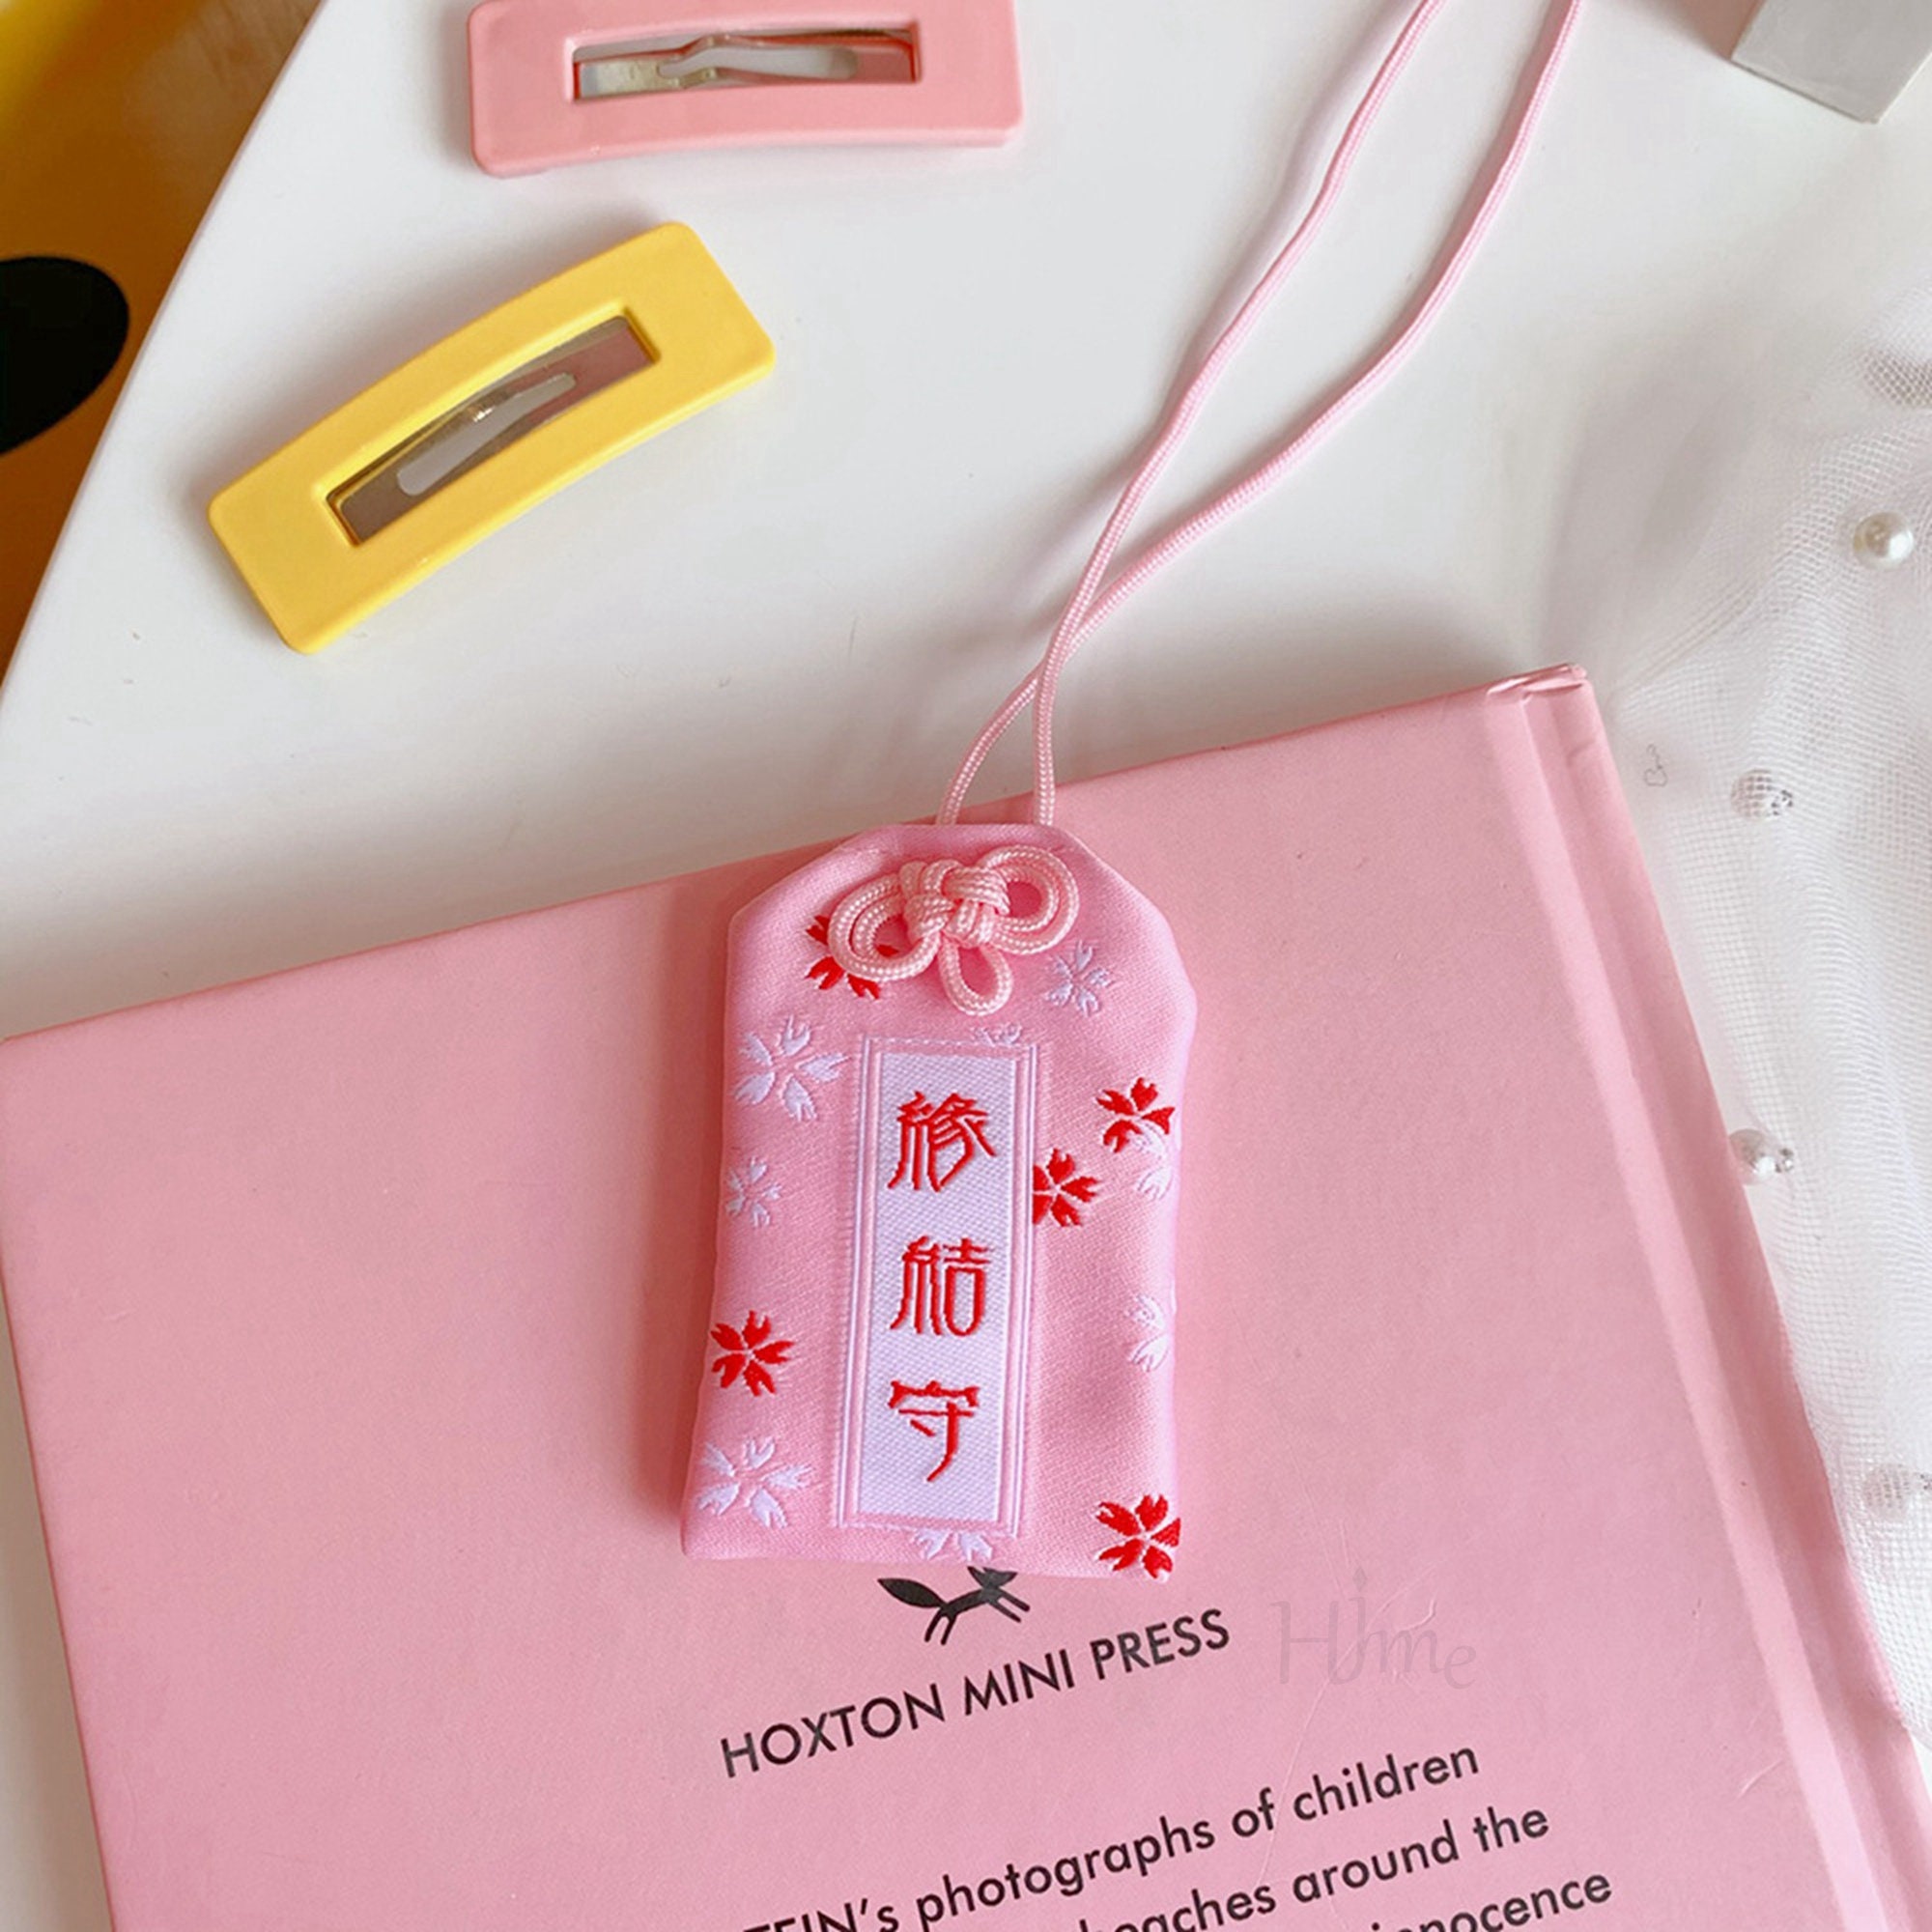 Handmade traditional Japanese Omamori blessing charm amulet for good  luck/health/wealth/Expel Bad Luck/Career/Education/Love/All  protection/Merry